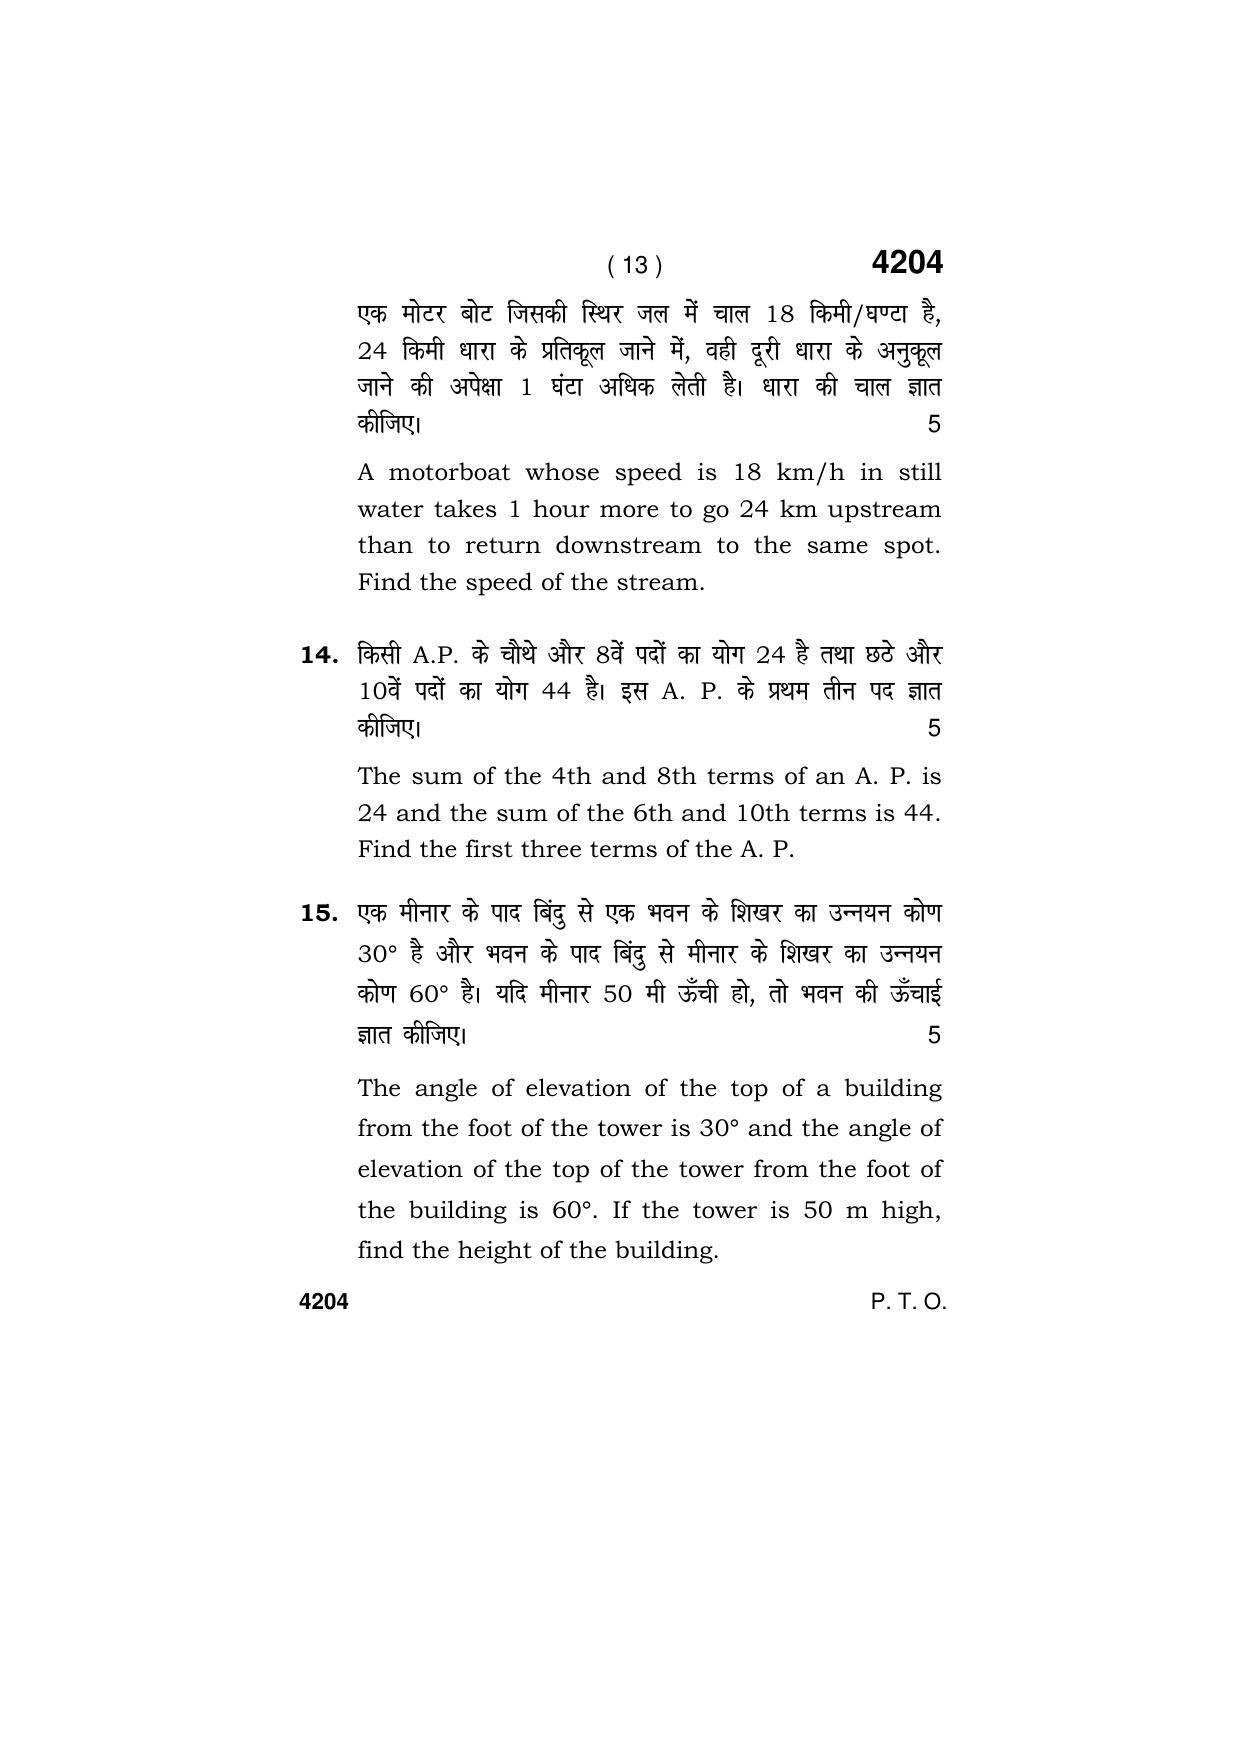 Haryana Board HBSE Class 10 Mathematics (Blind c) 2019 Question Paper - Page 13